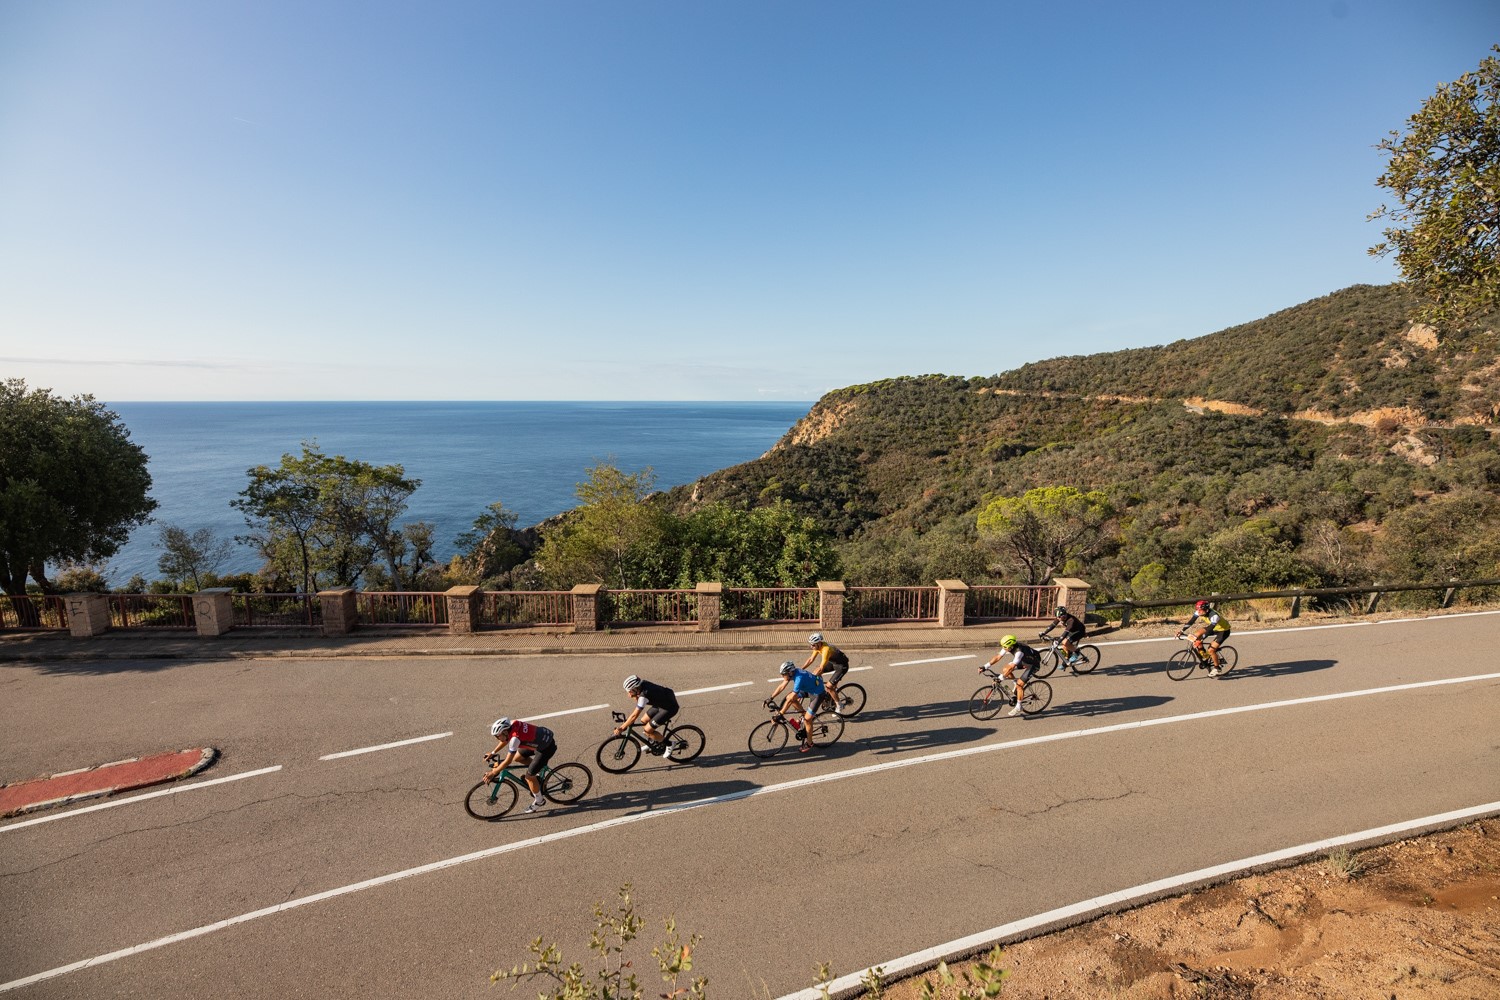 7 road bike riders on coastal road in sunshine with blue sea and sky in the background